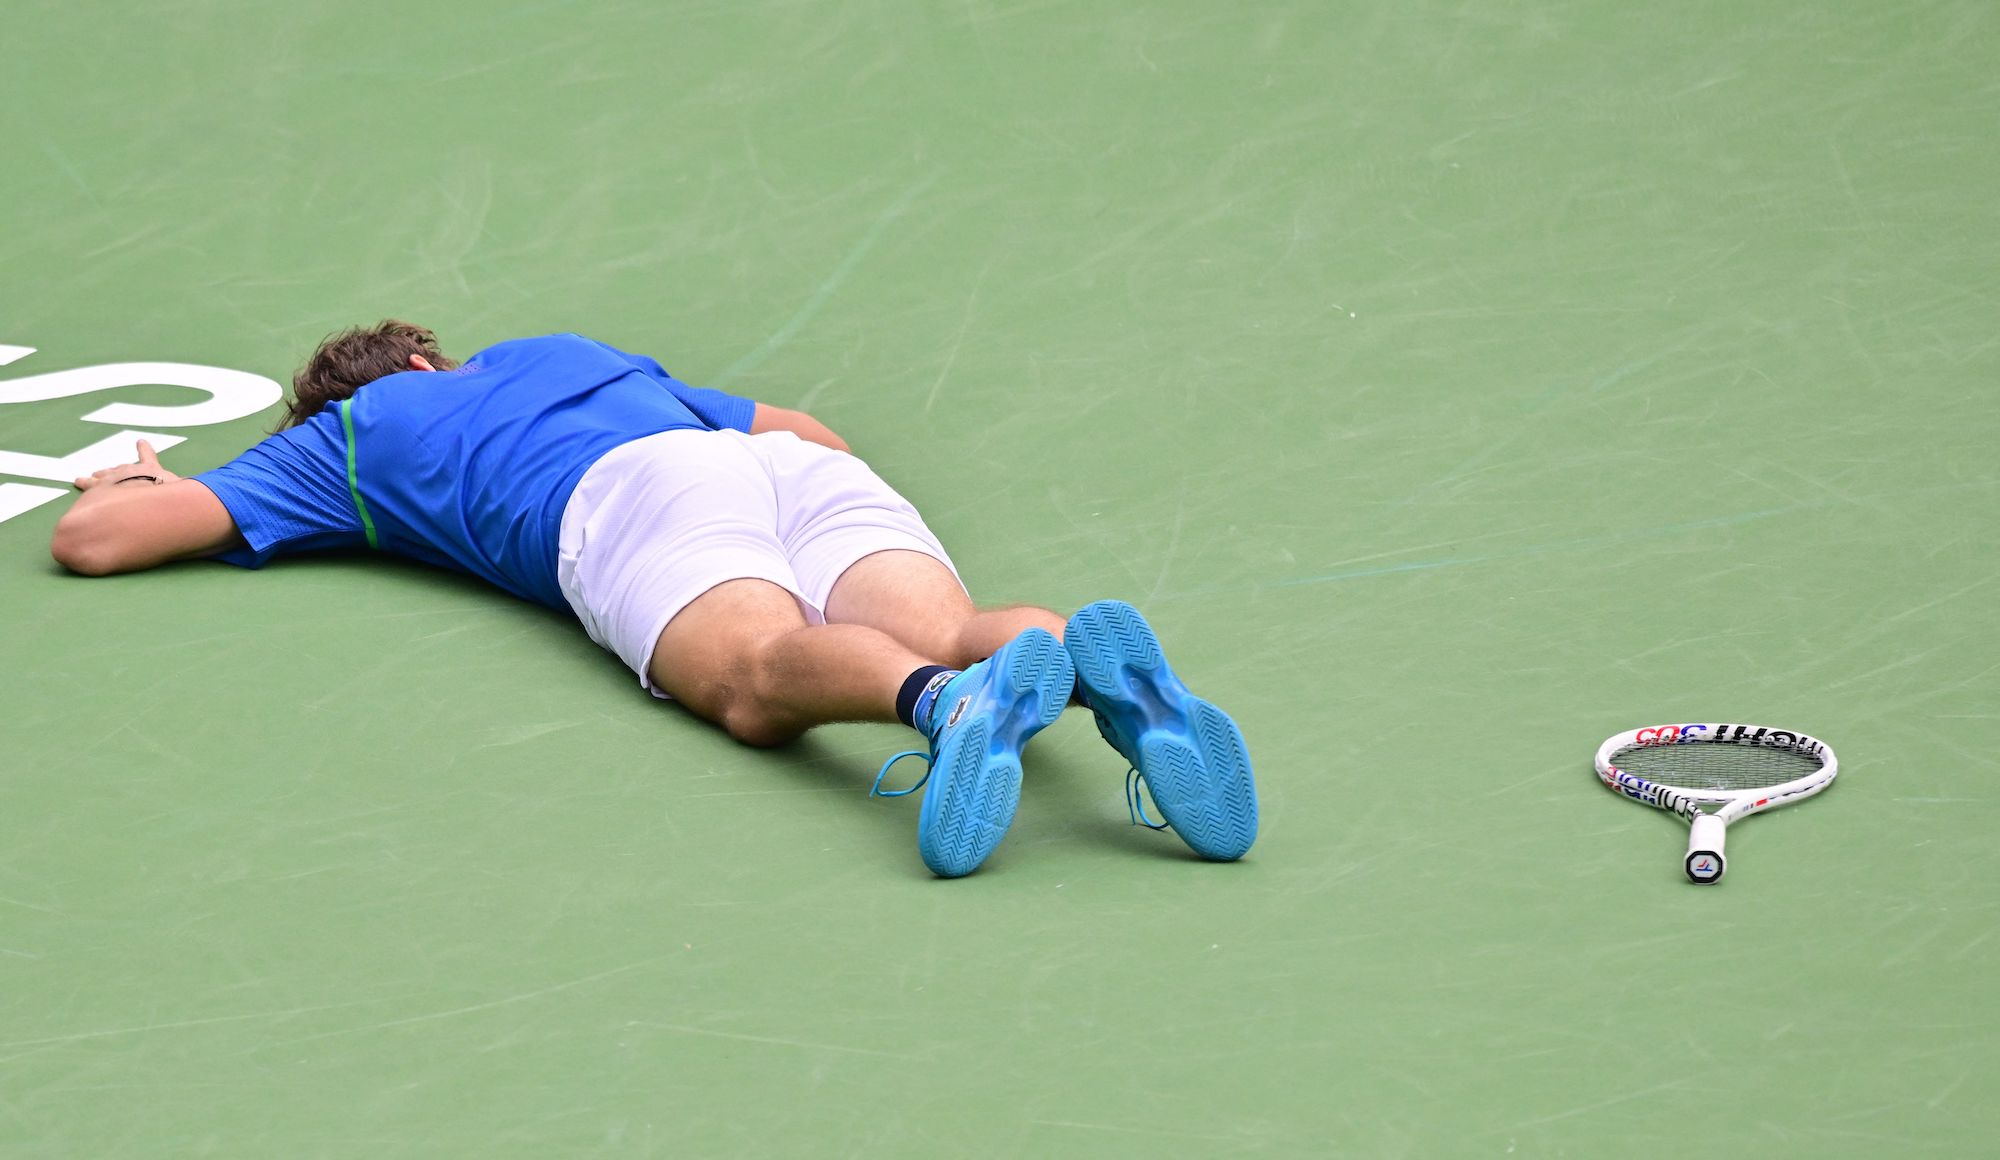 Daniil Medvedev lies on the court during his fourth-round match at Indian Wells.